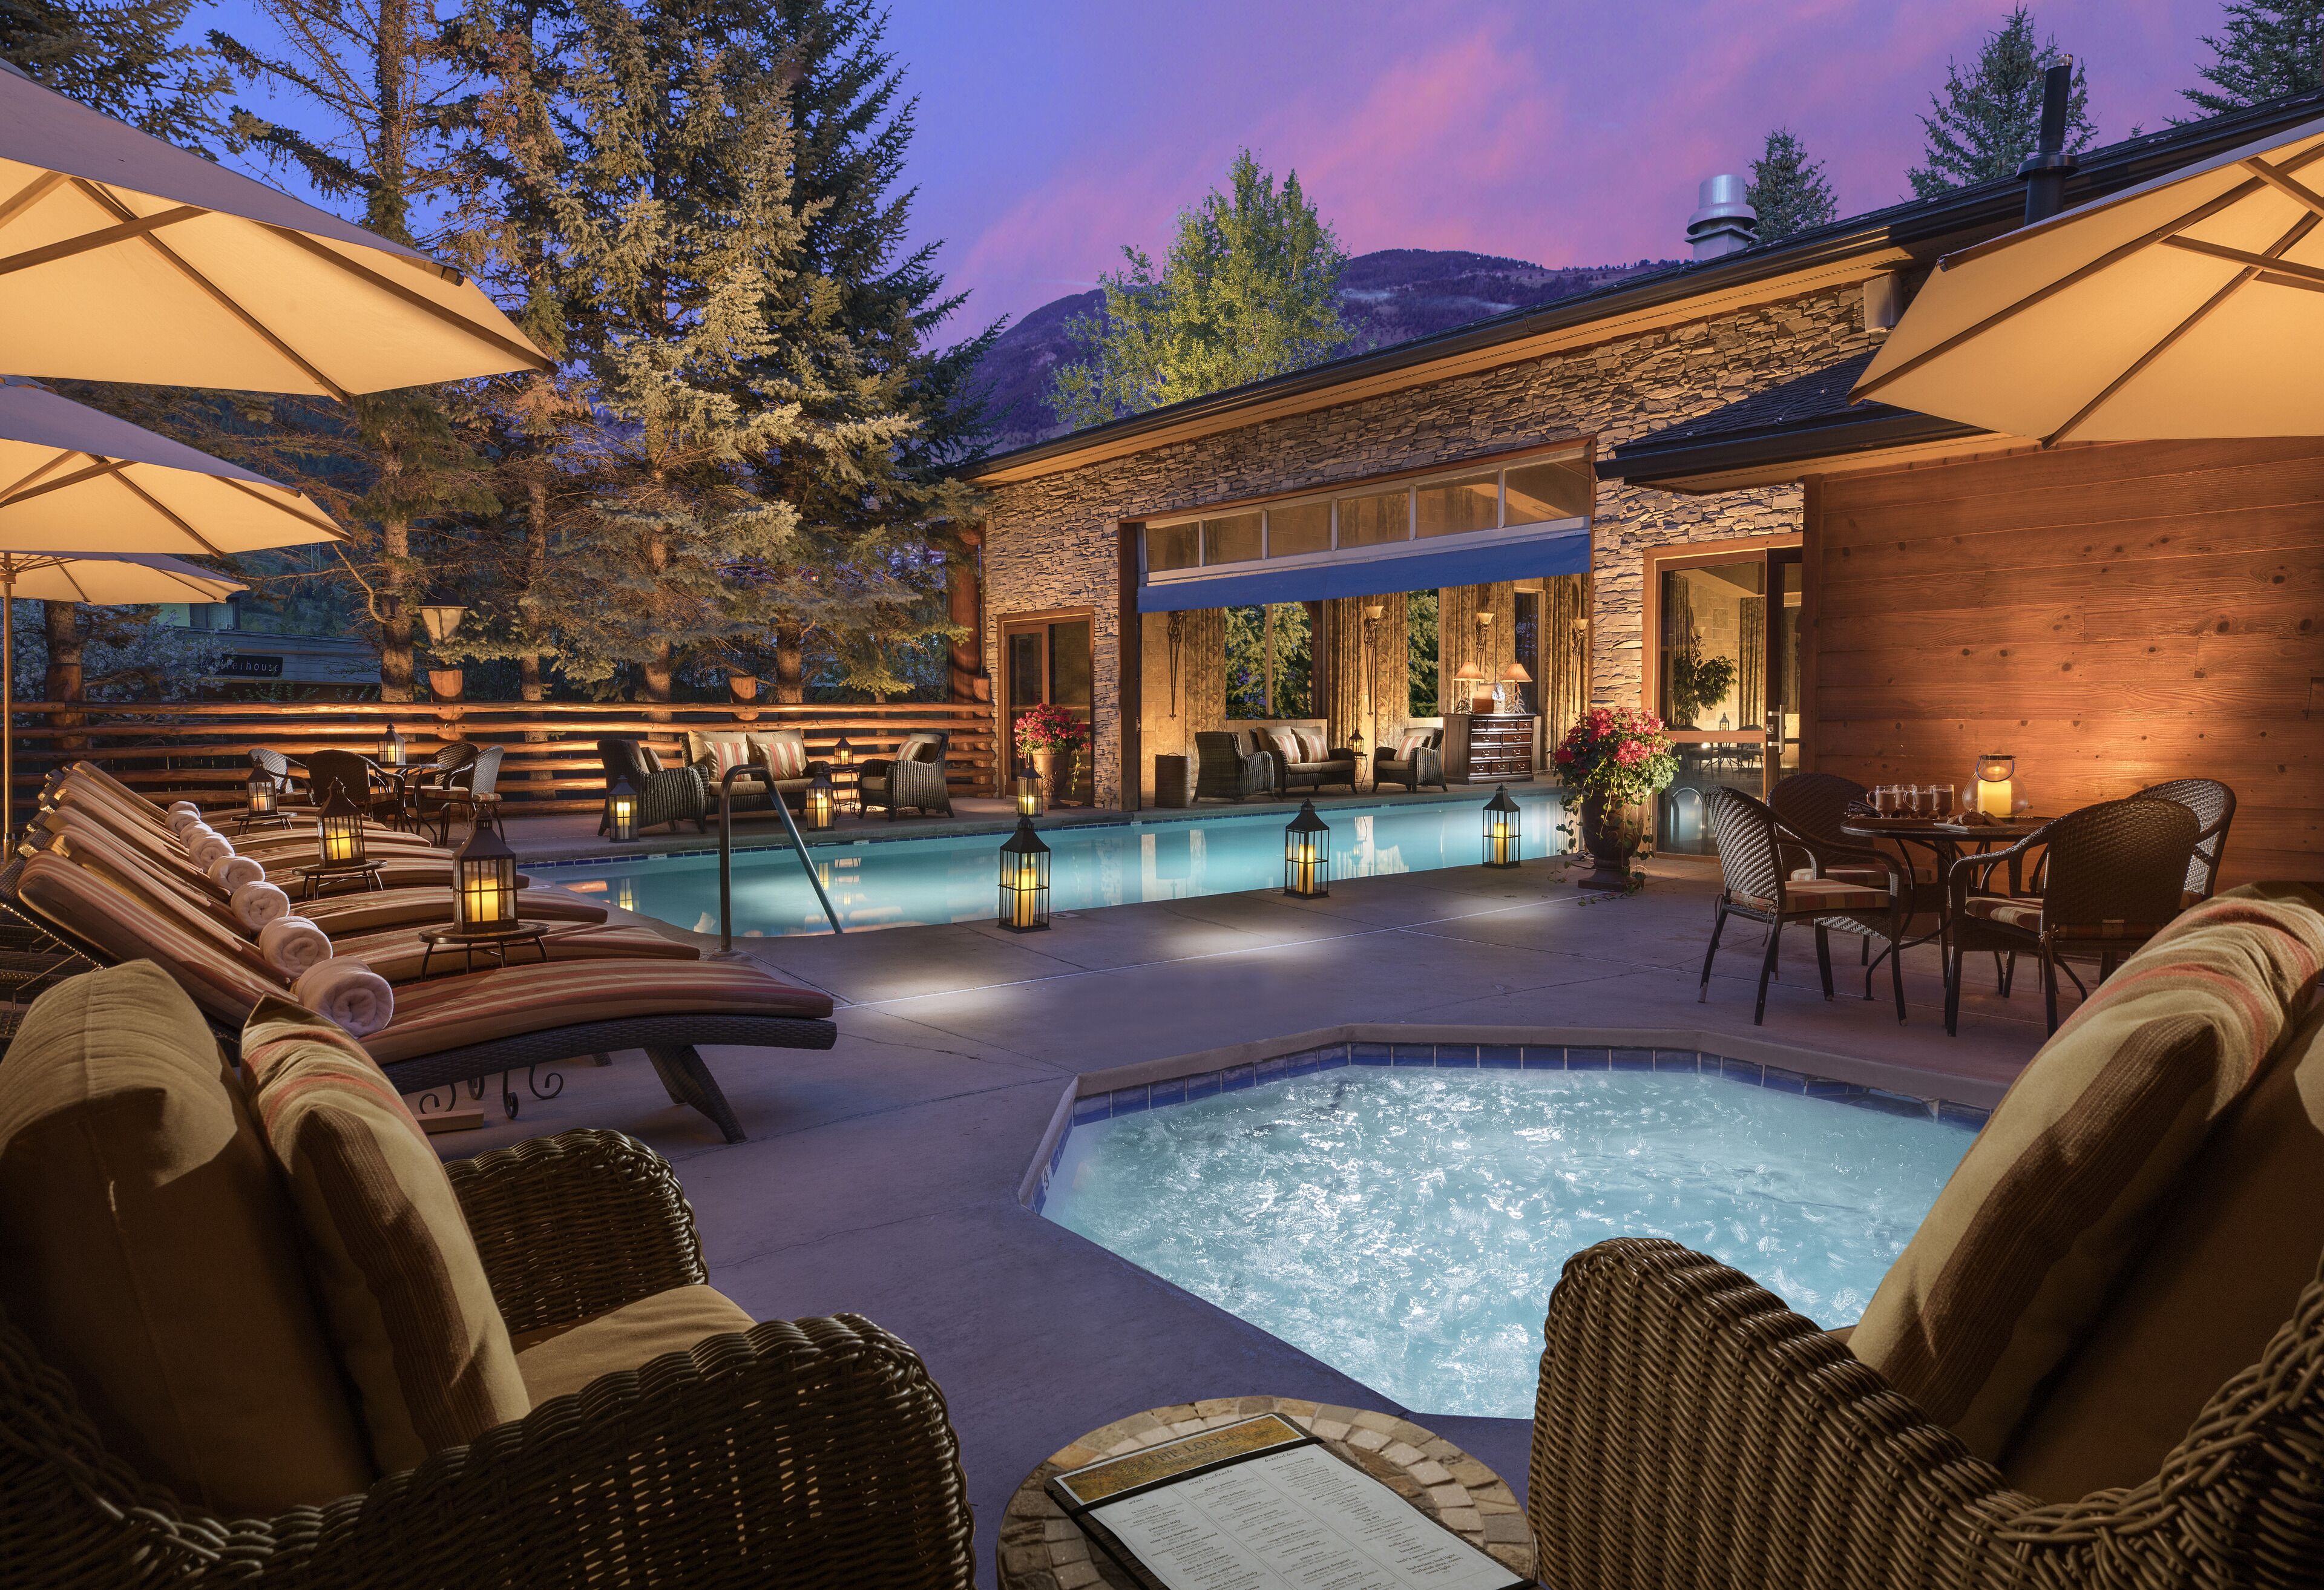 Pool view of The Lodge at Jackson Hole